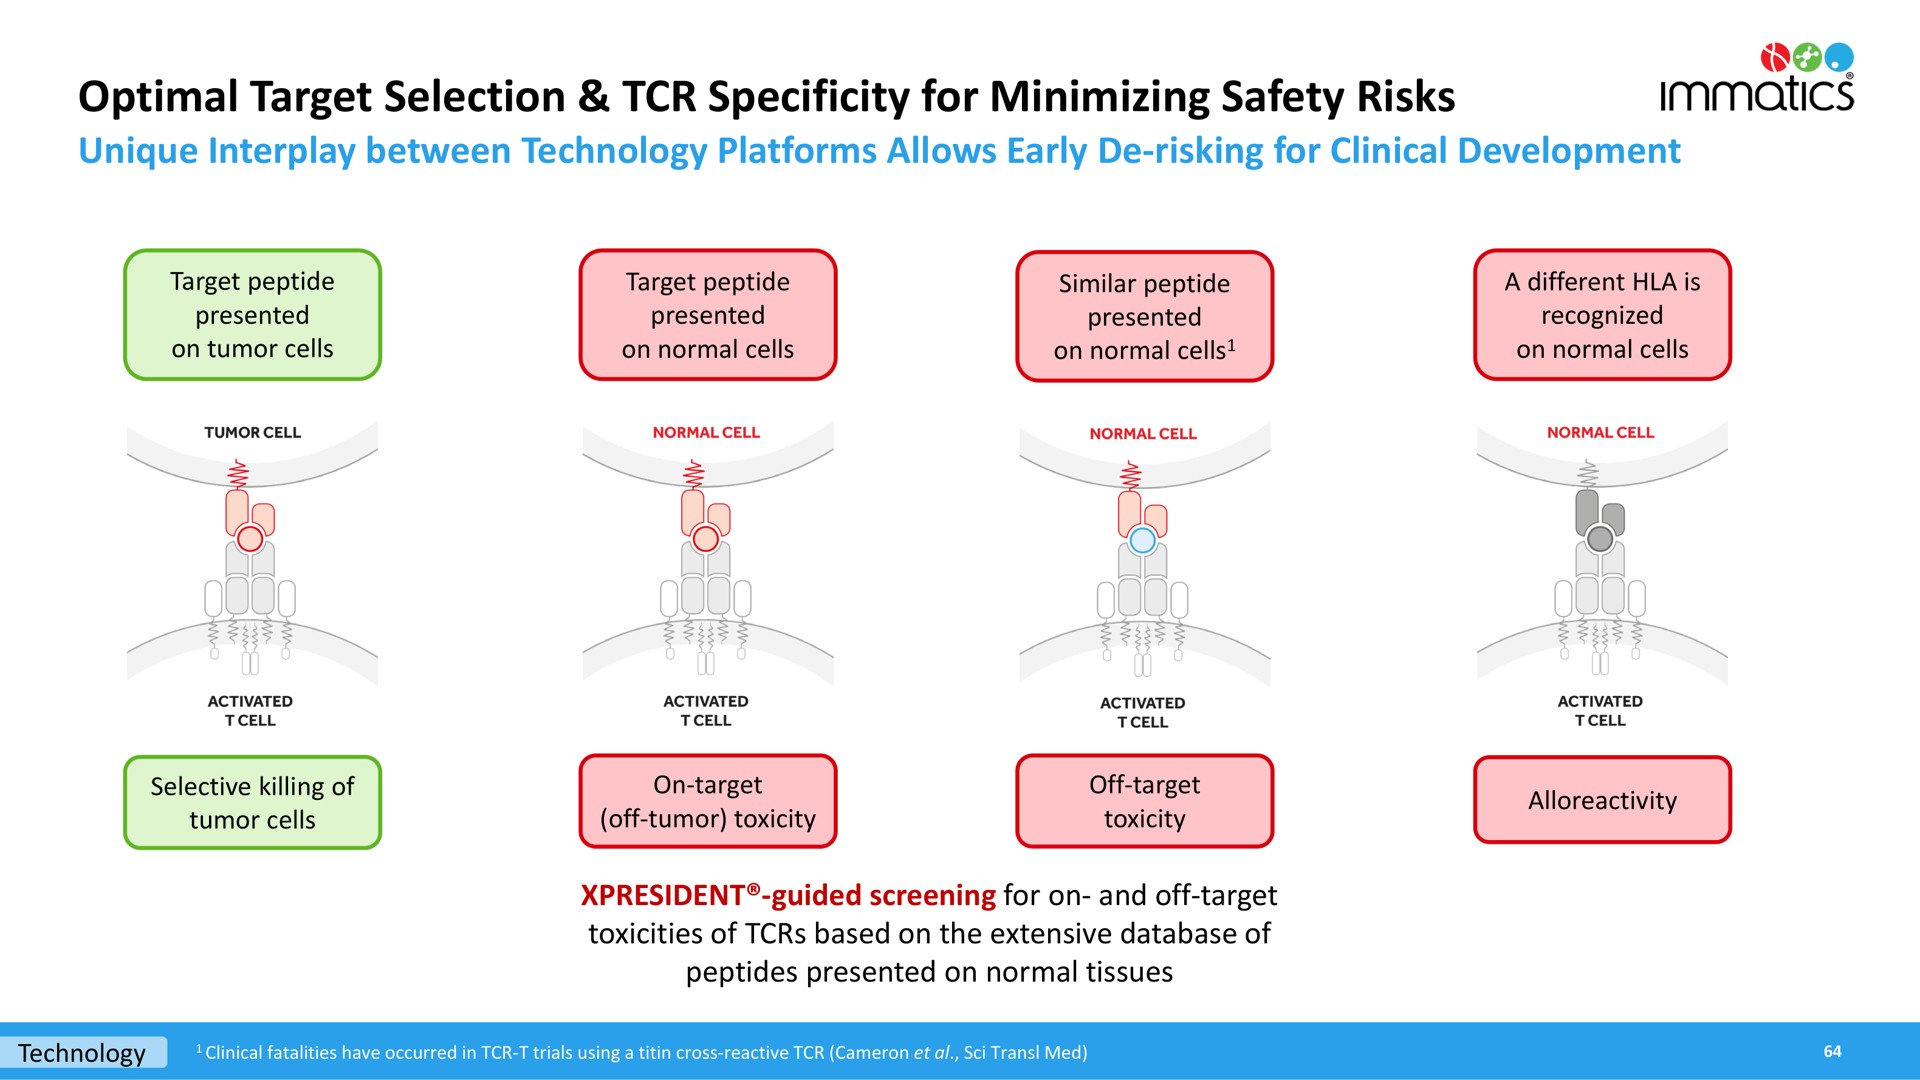 optimal target selection specificity for minimizing safety risks | Immatics